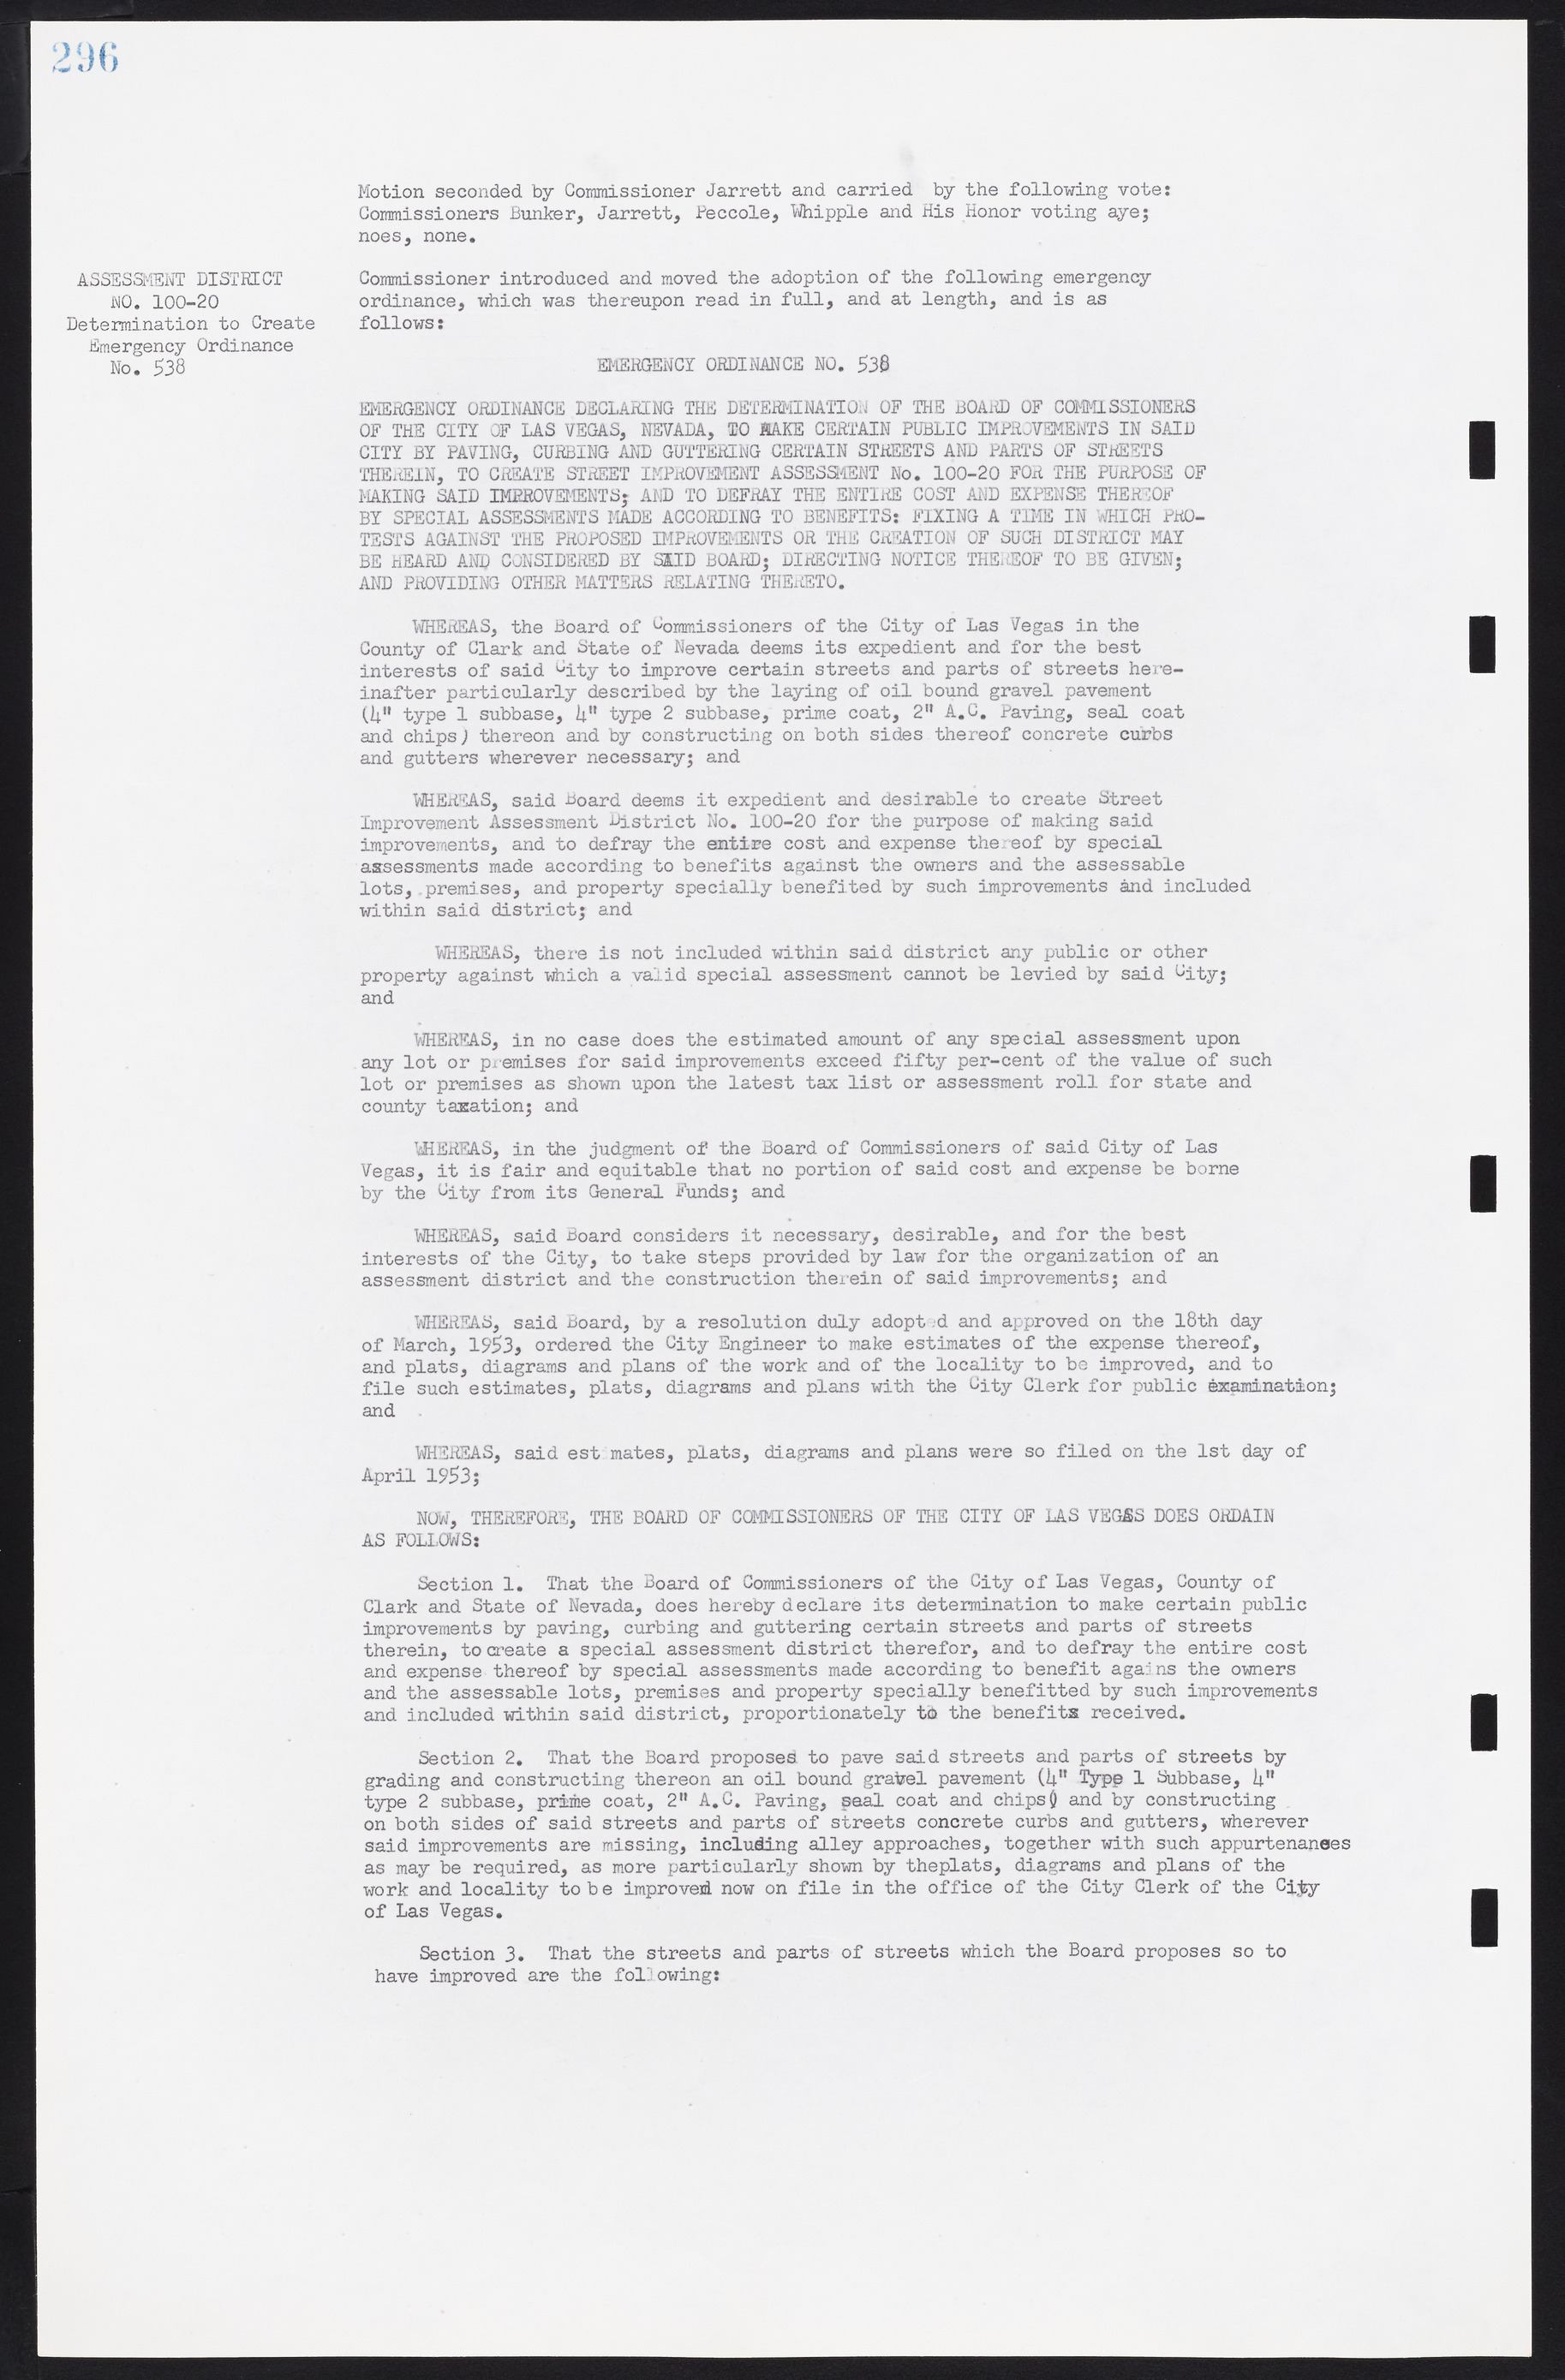 Las Vegas City Commission Minutes, May 26, 1952 to February 17, 1954, lvc000008-324